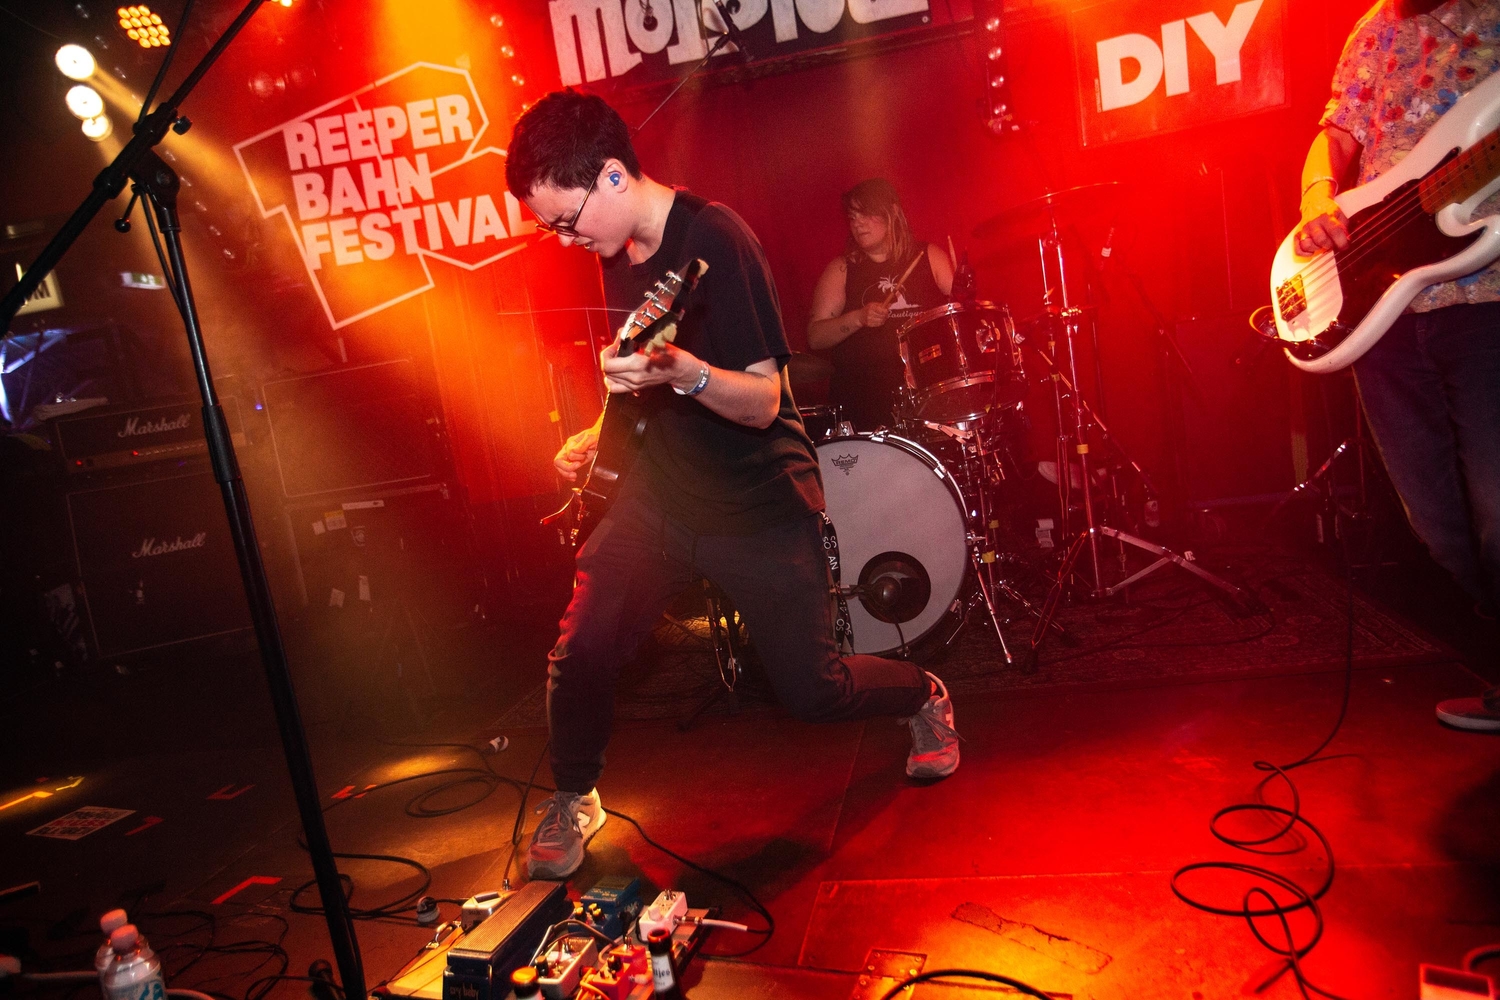 Sports Team close out Reeperbahn 2019 with a high octane set on the DIY Stage